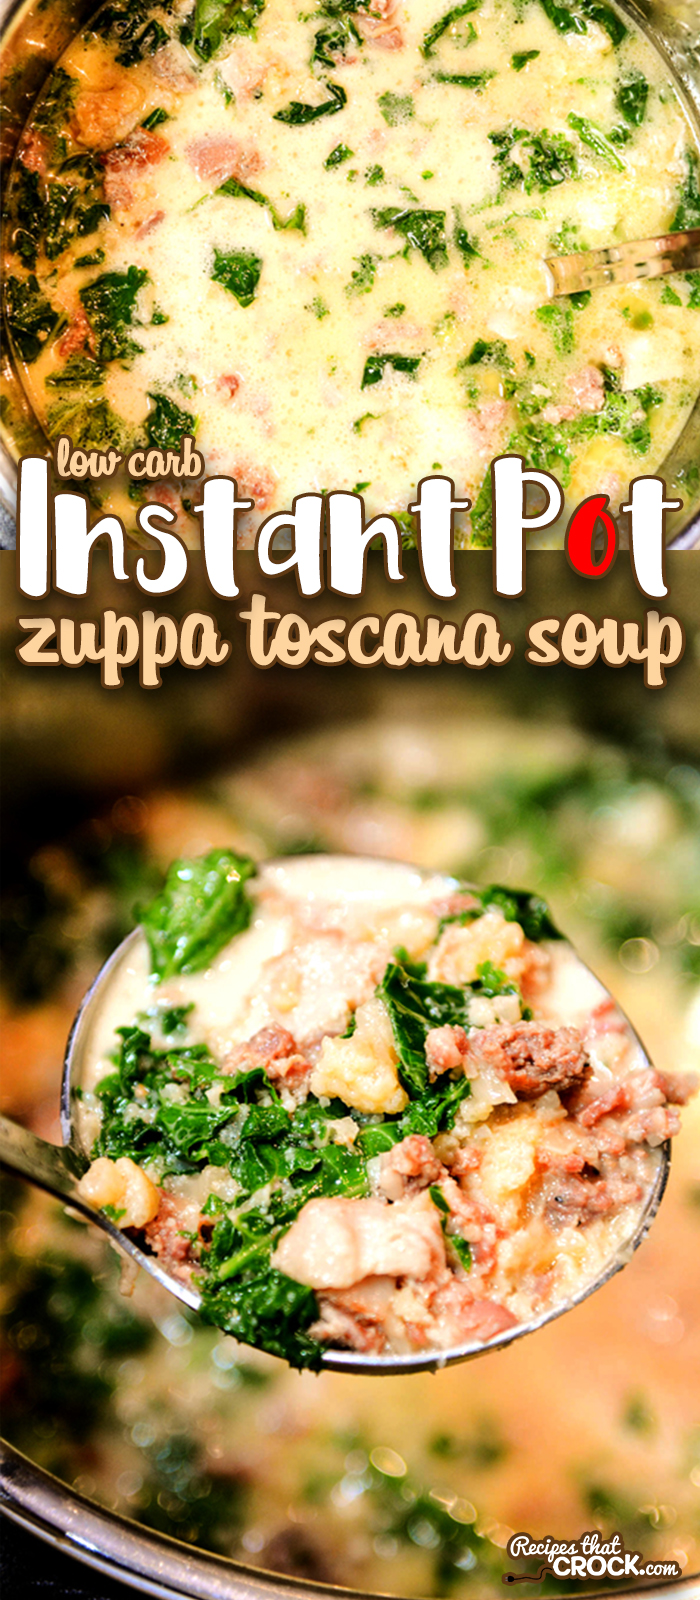 Do you LOVE our Crock Pot Zuppa Toscana Soup as much as we do? Our electric pressure cooker version is just as good and ready in a fraction of the time! Our Instant Pot Zuppa Toscana Soup can be made with traditional ingredients or easily adapted as a low carb recipe. #Ad #RecycleYourCartons#Crockpot #Soup #InstantPot #ElectricPressureCooker #lowcarb #lchf